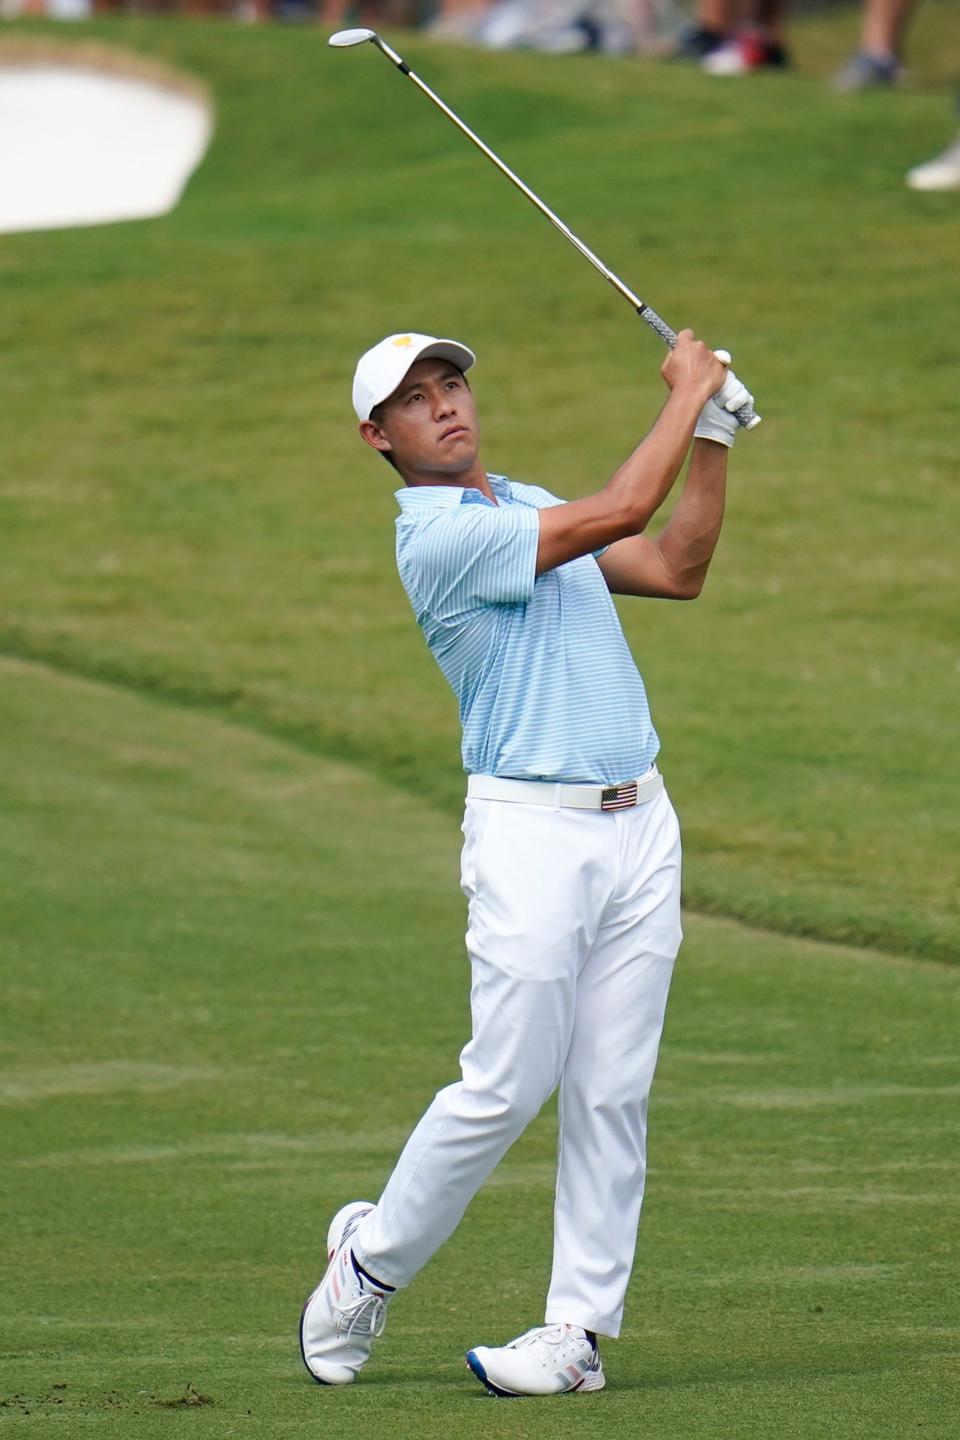 Collin Morikawa hits from the fifth fairway during their foursomes match at the Presidents Cup golf tournament at the Quail Hollow Club on Sept. 22, 2022, in Charlotte, N.C.